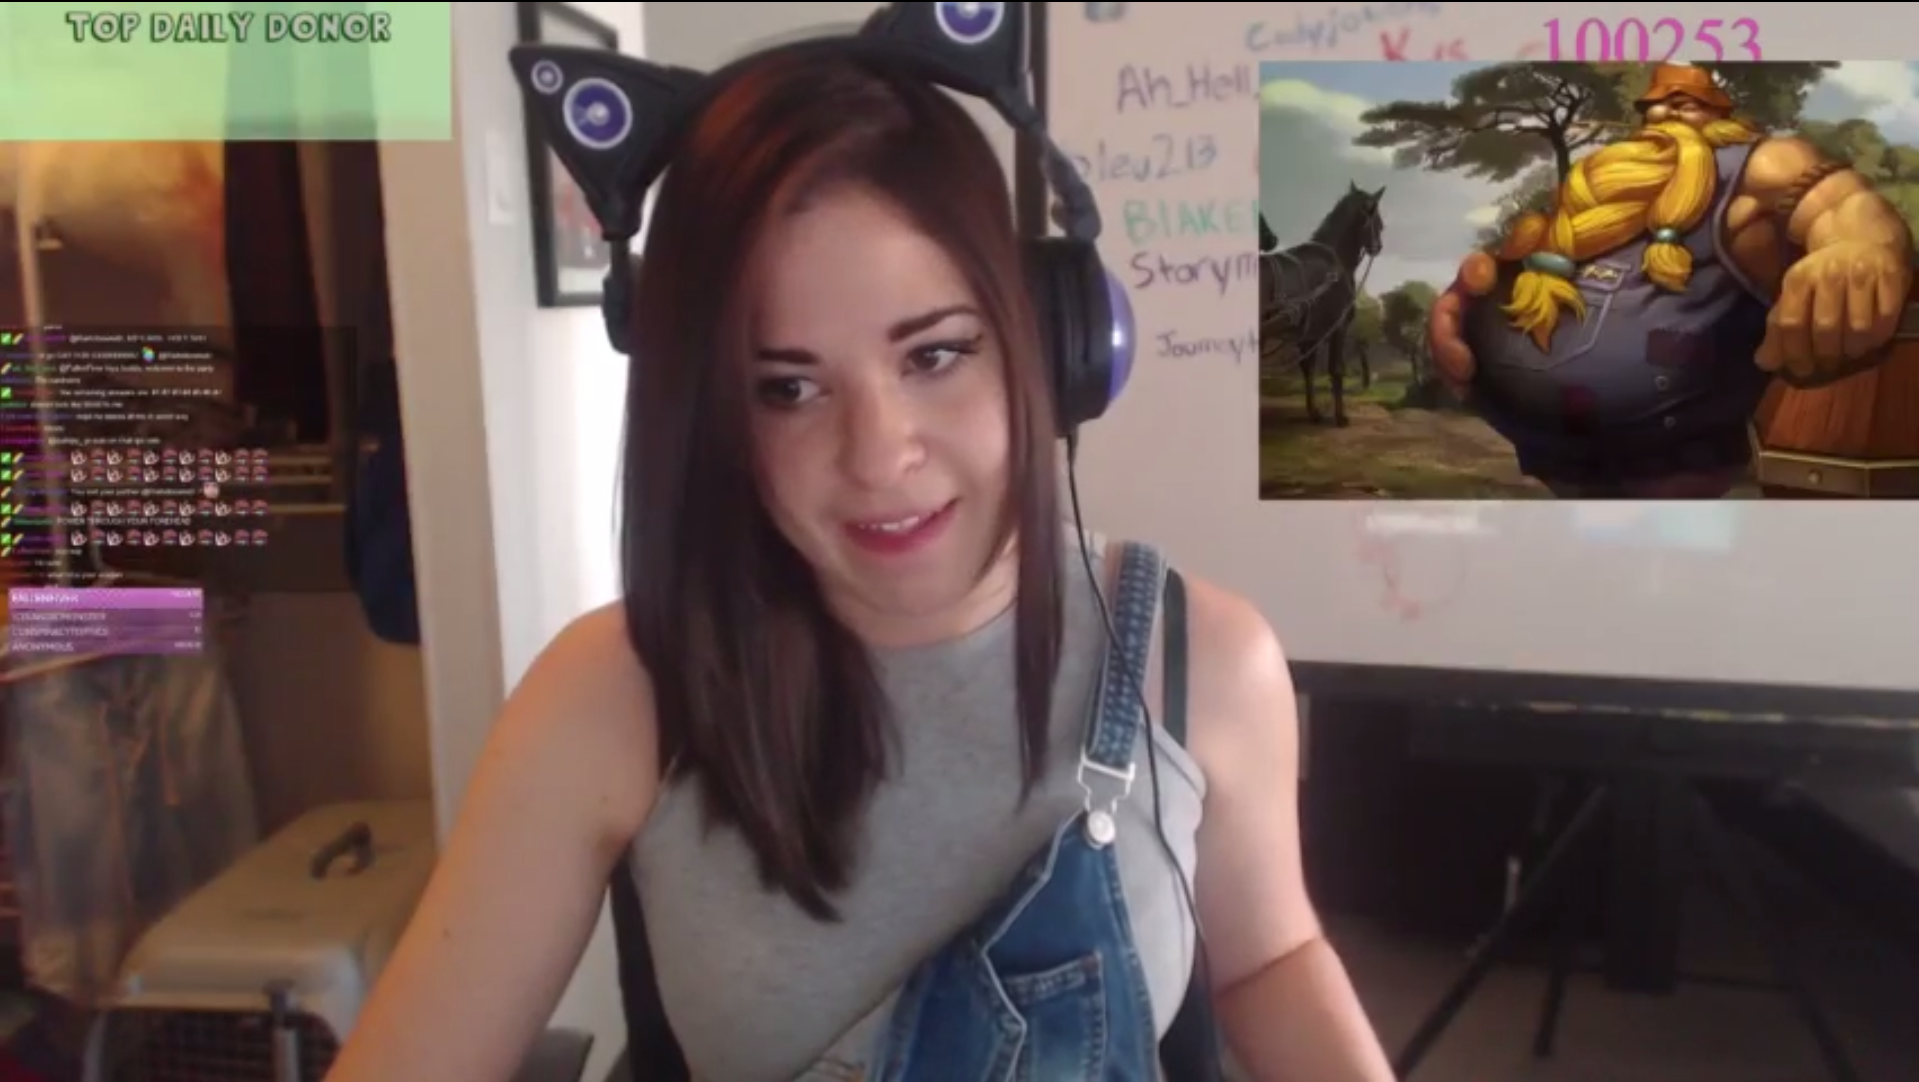 On tits stream shows girl woman shows